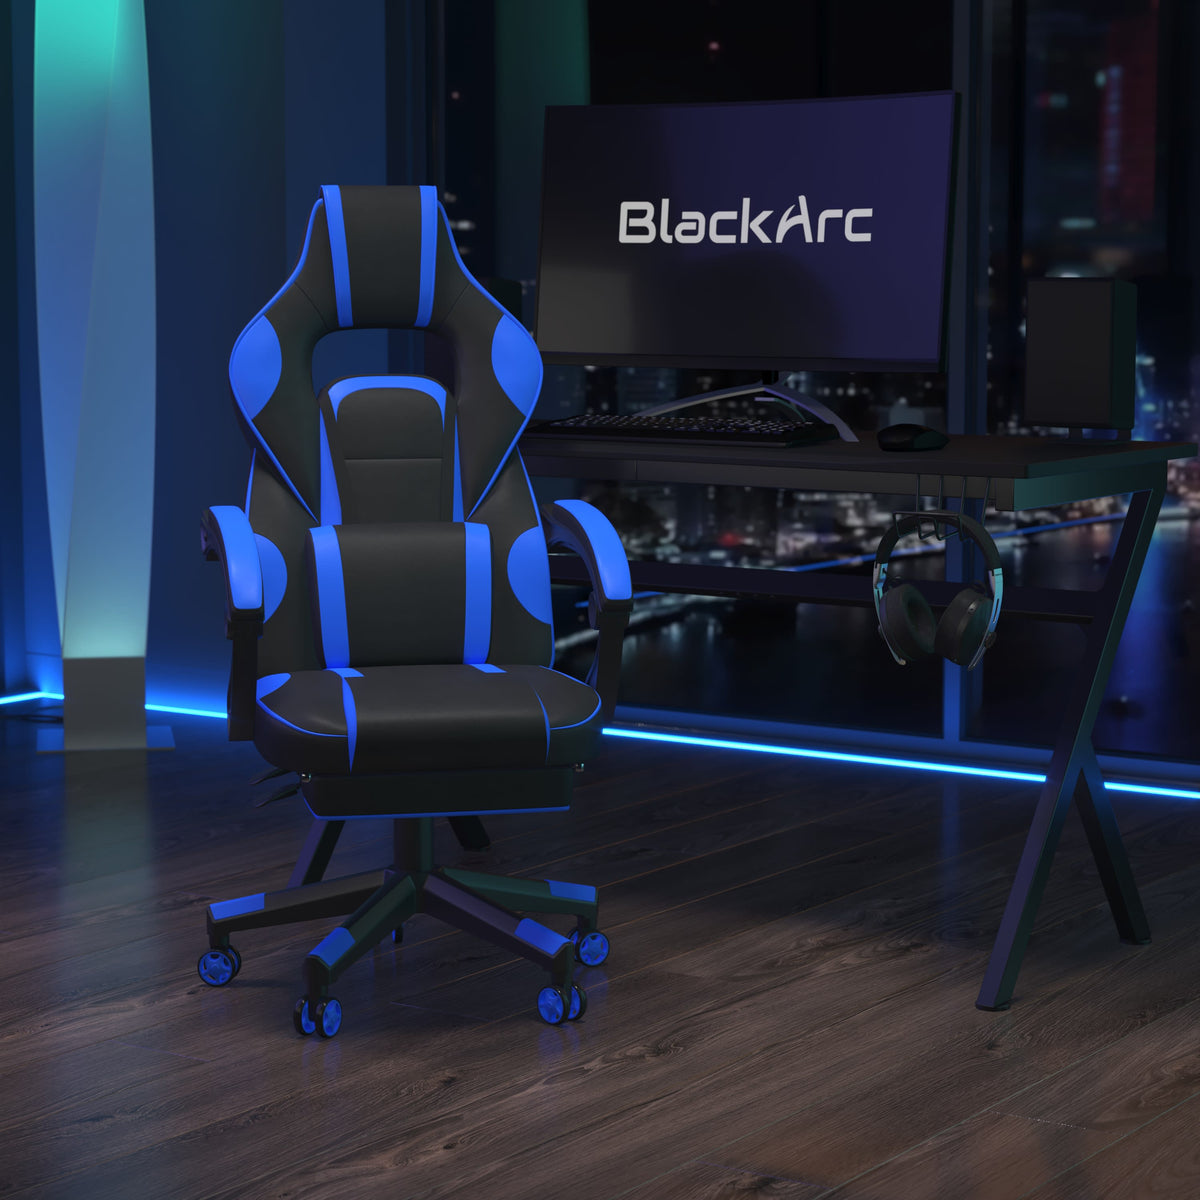 Black with Blue Trim |#| Fully Reclining Gaming Chair with Slideout Footrest, Lumbar Massage-Black/Blue